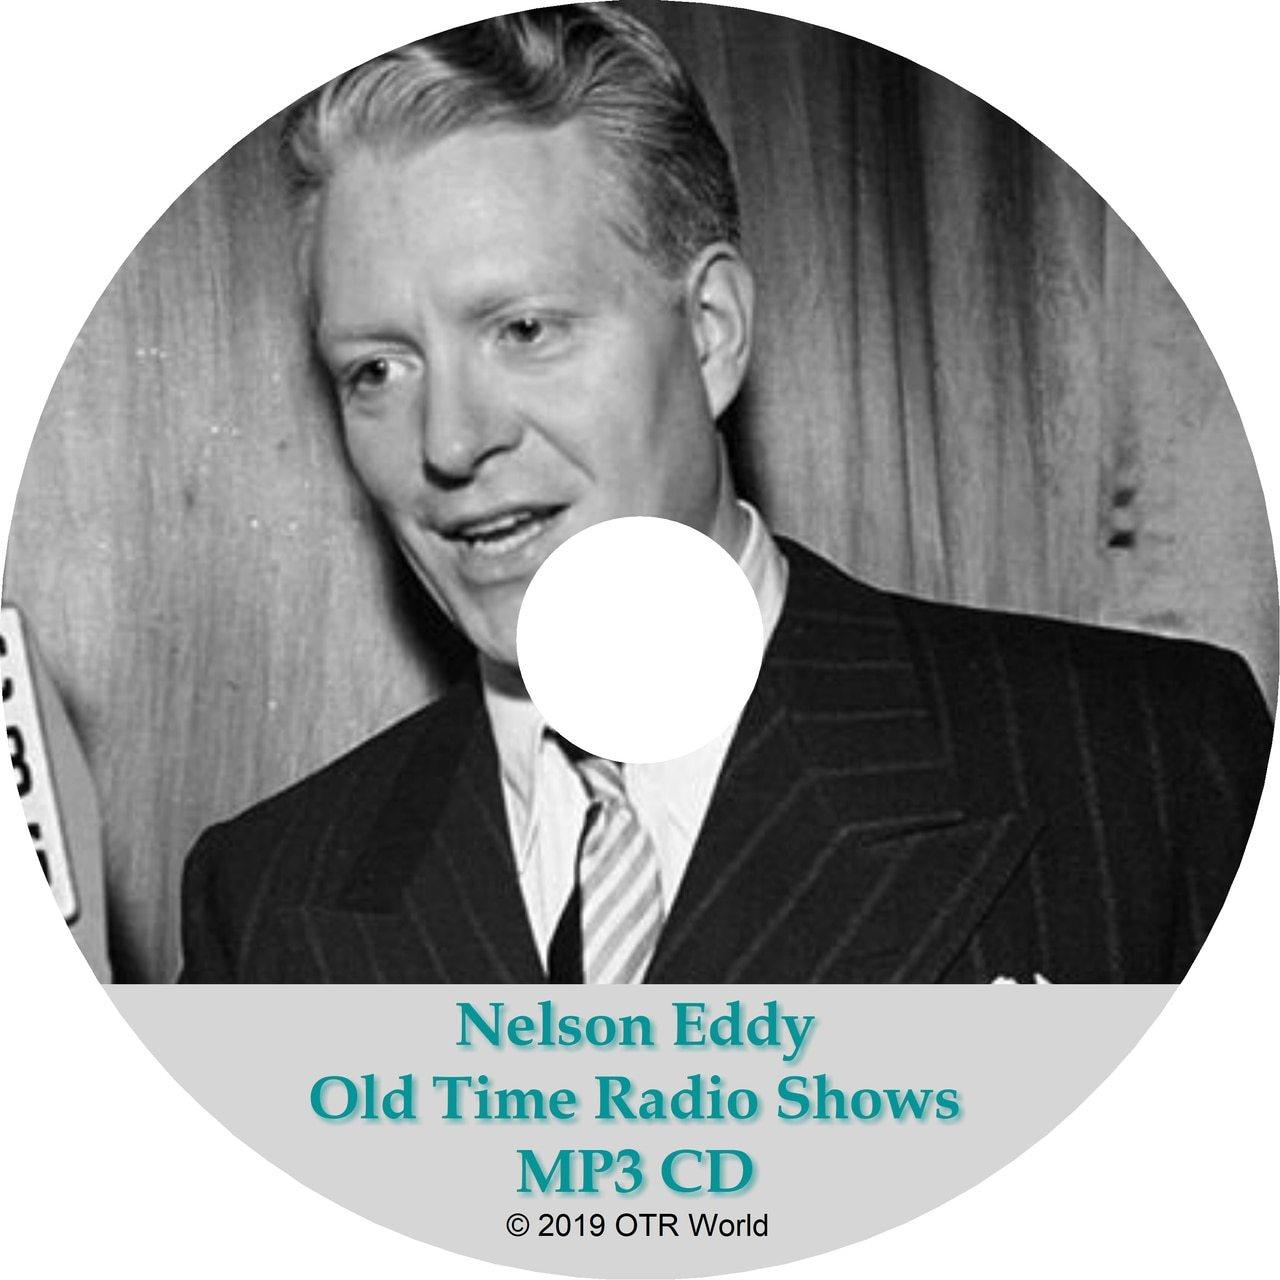 The Electric Hour Presents Nelson Eddy Old Time Radio Shows 19 Episodes MP3 CD-R - OTR World